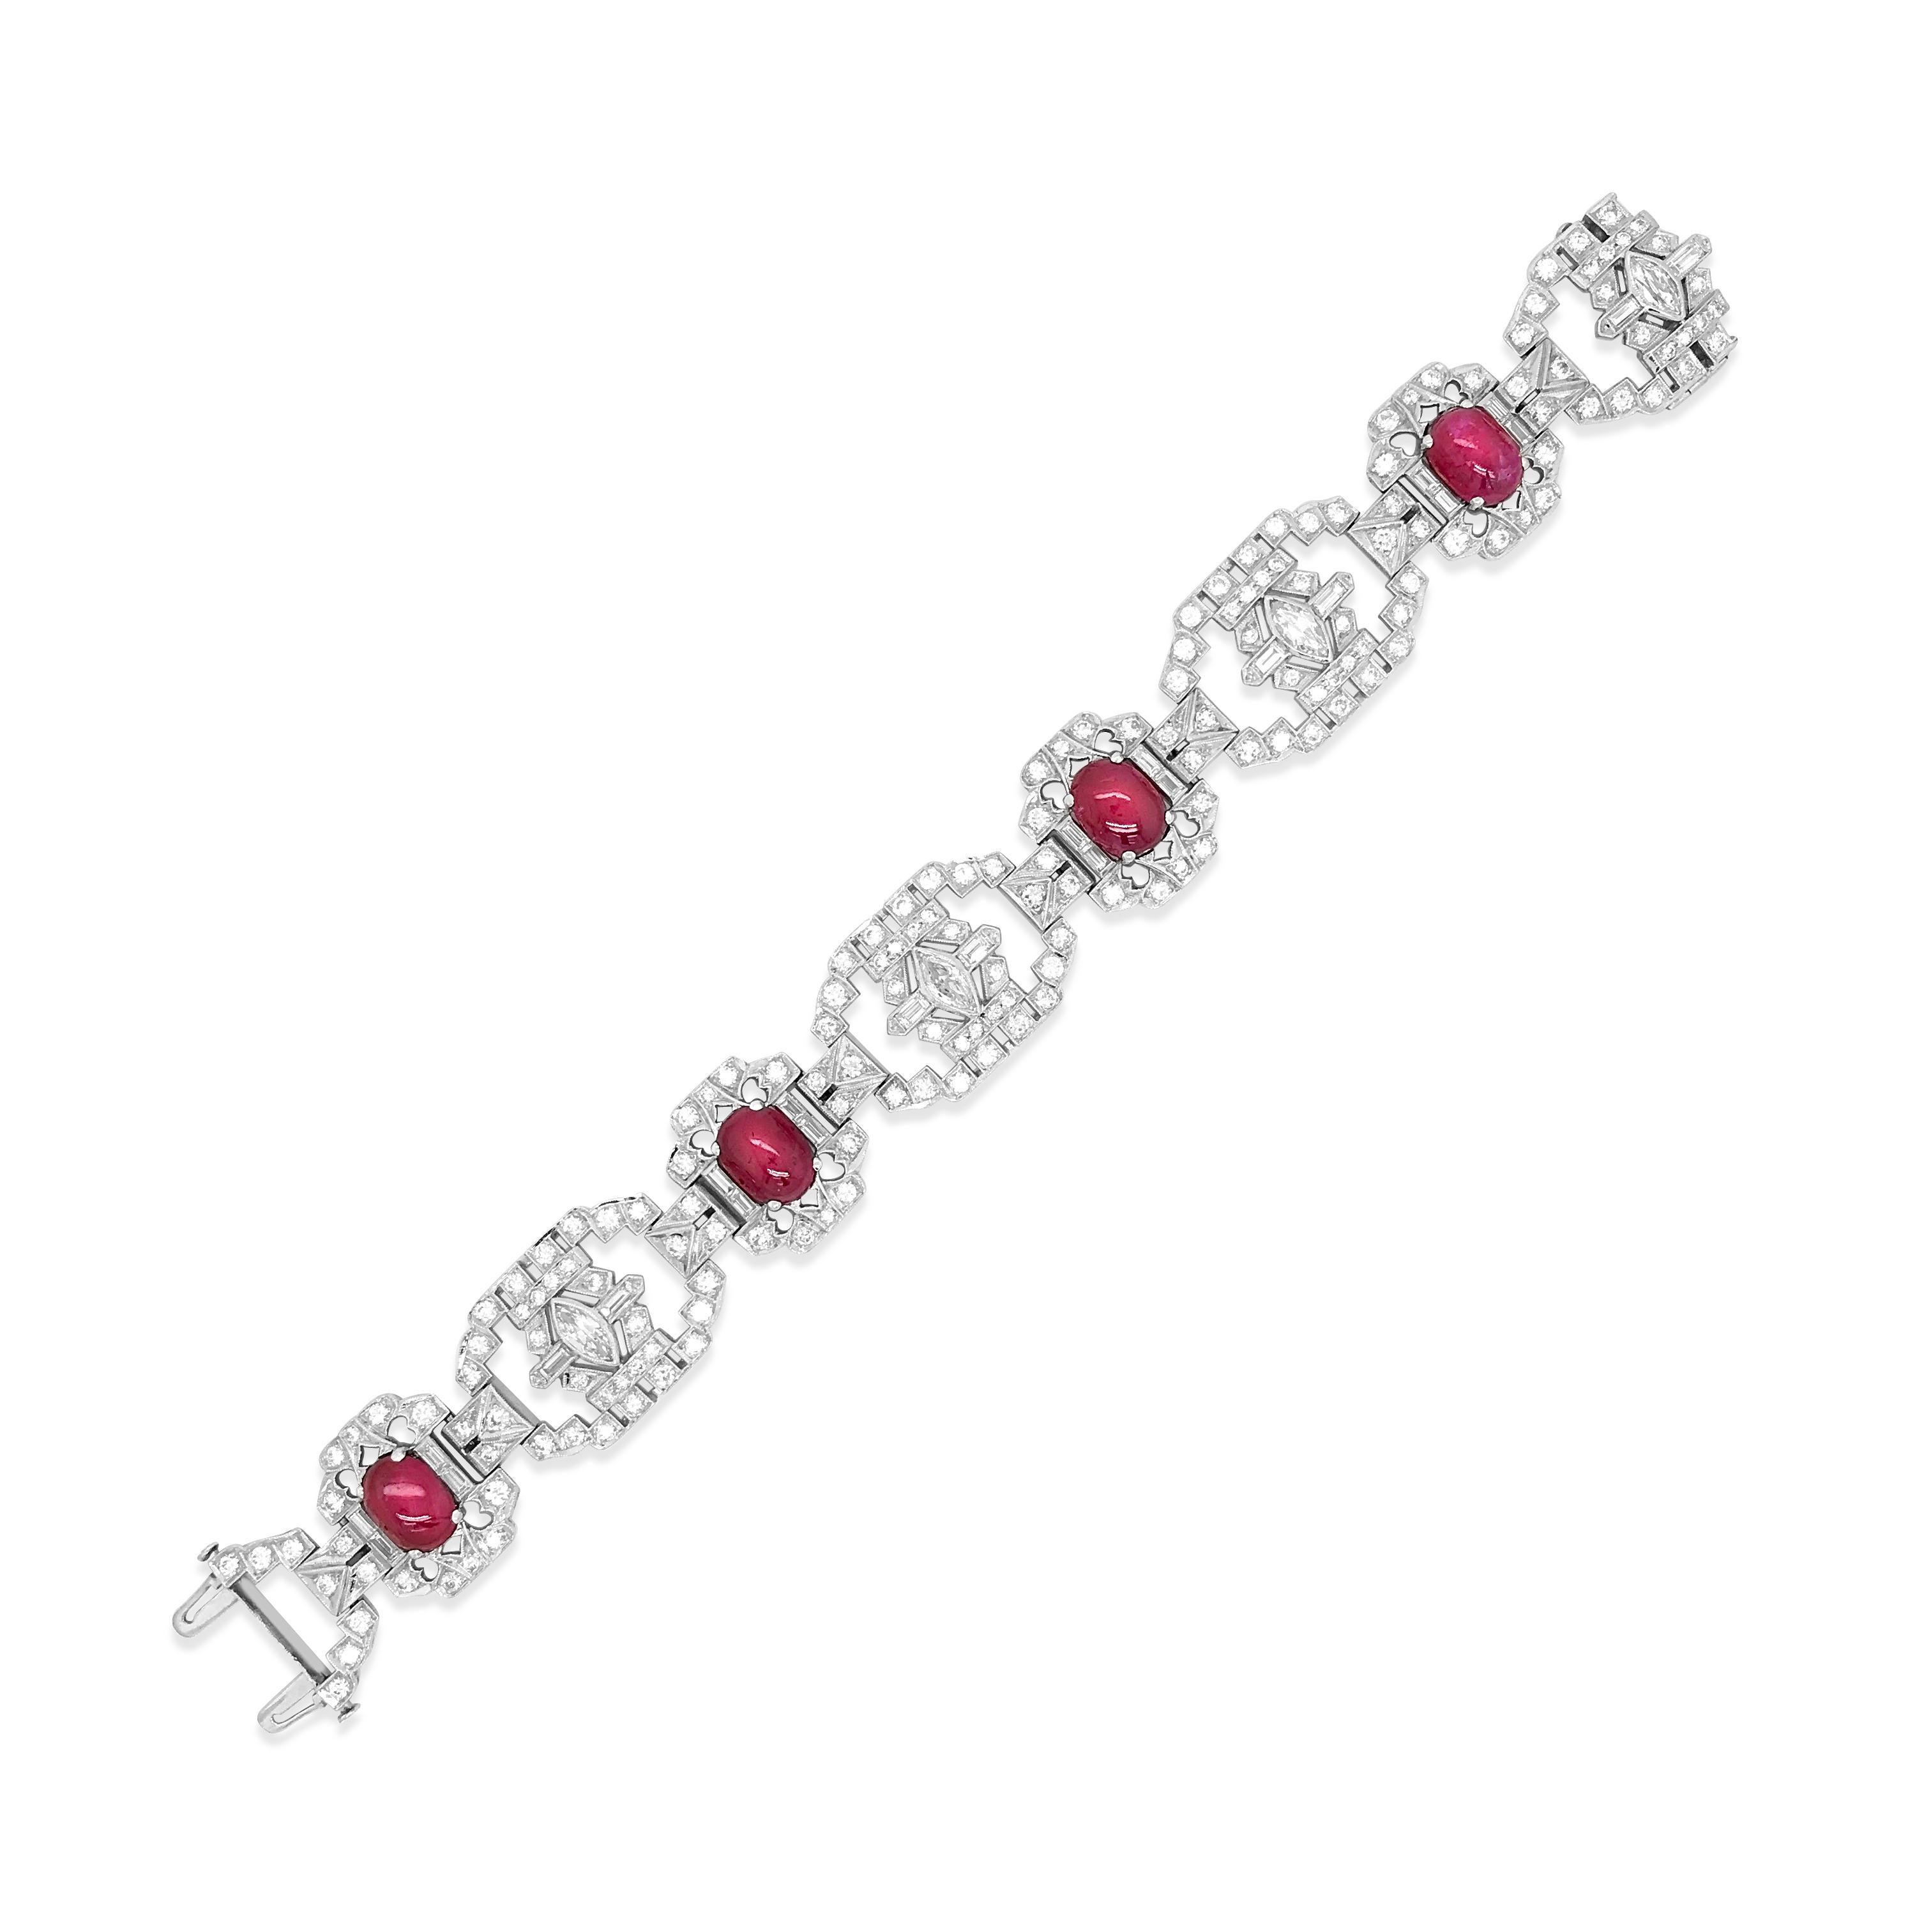 This stunning Burma origin and unheated ruby and diamond bracelet weighs 47.36 grams and measures 18.4cm (7.24 inches) long. Composed of openwork geometric links highlighted by 4 oval cabochon rubies approximately 13.75 cts, centering 4